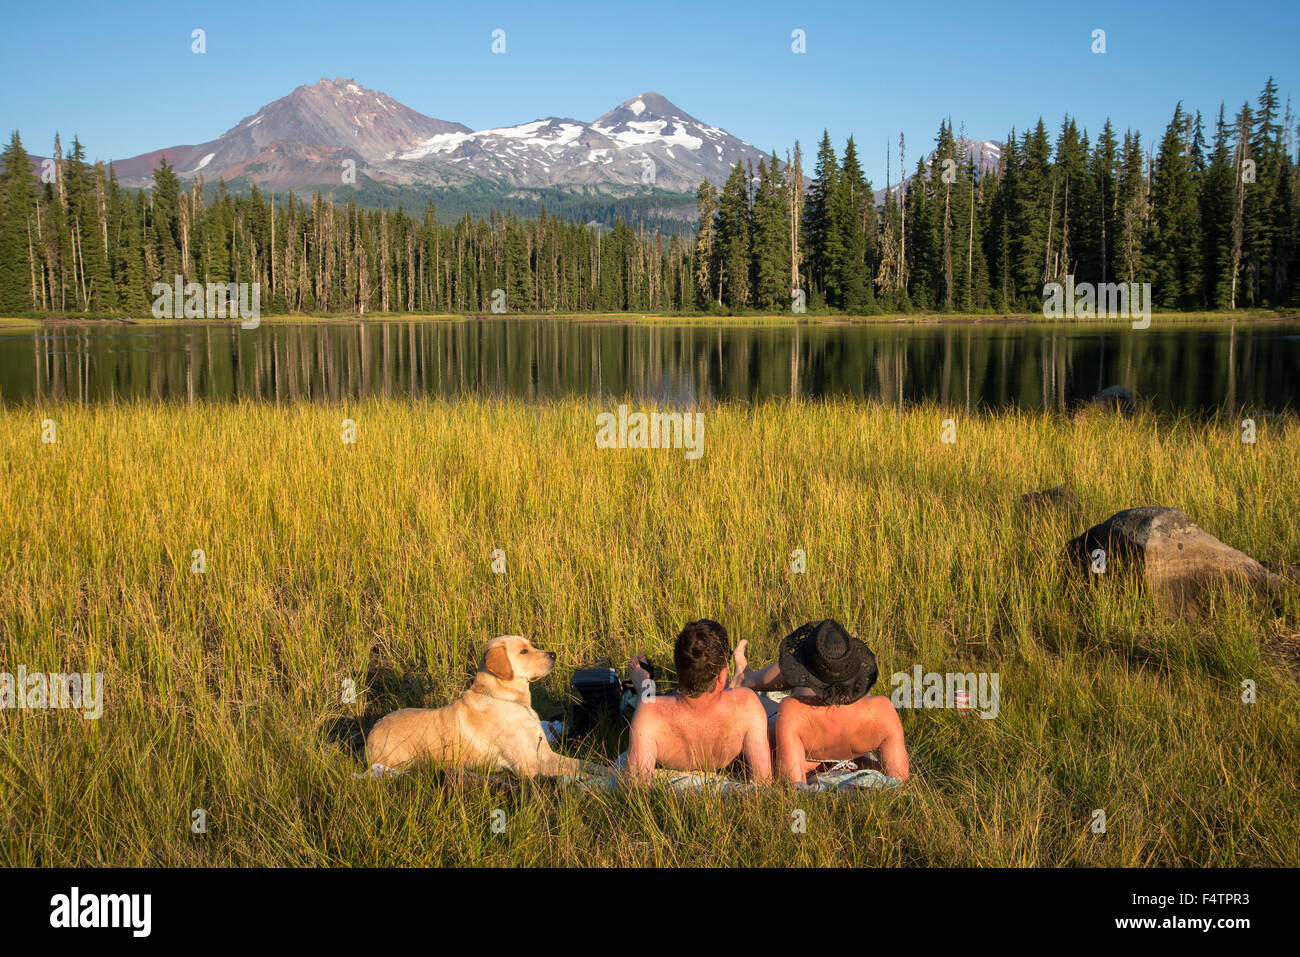 USA, Oregon, Lane County, Willamette, National Forest, Scott Lake, couple with dog tanning at lake    MR 0514, 0515 Stock Photo